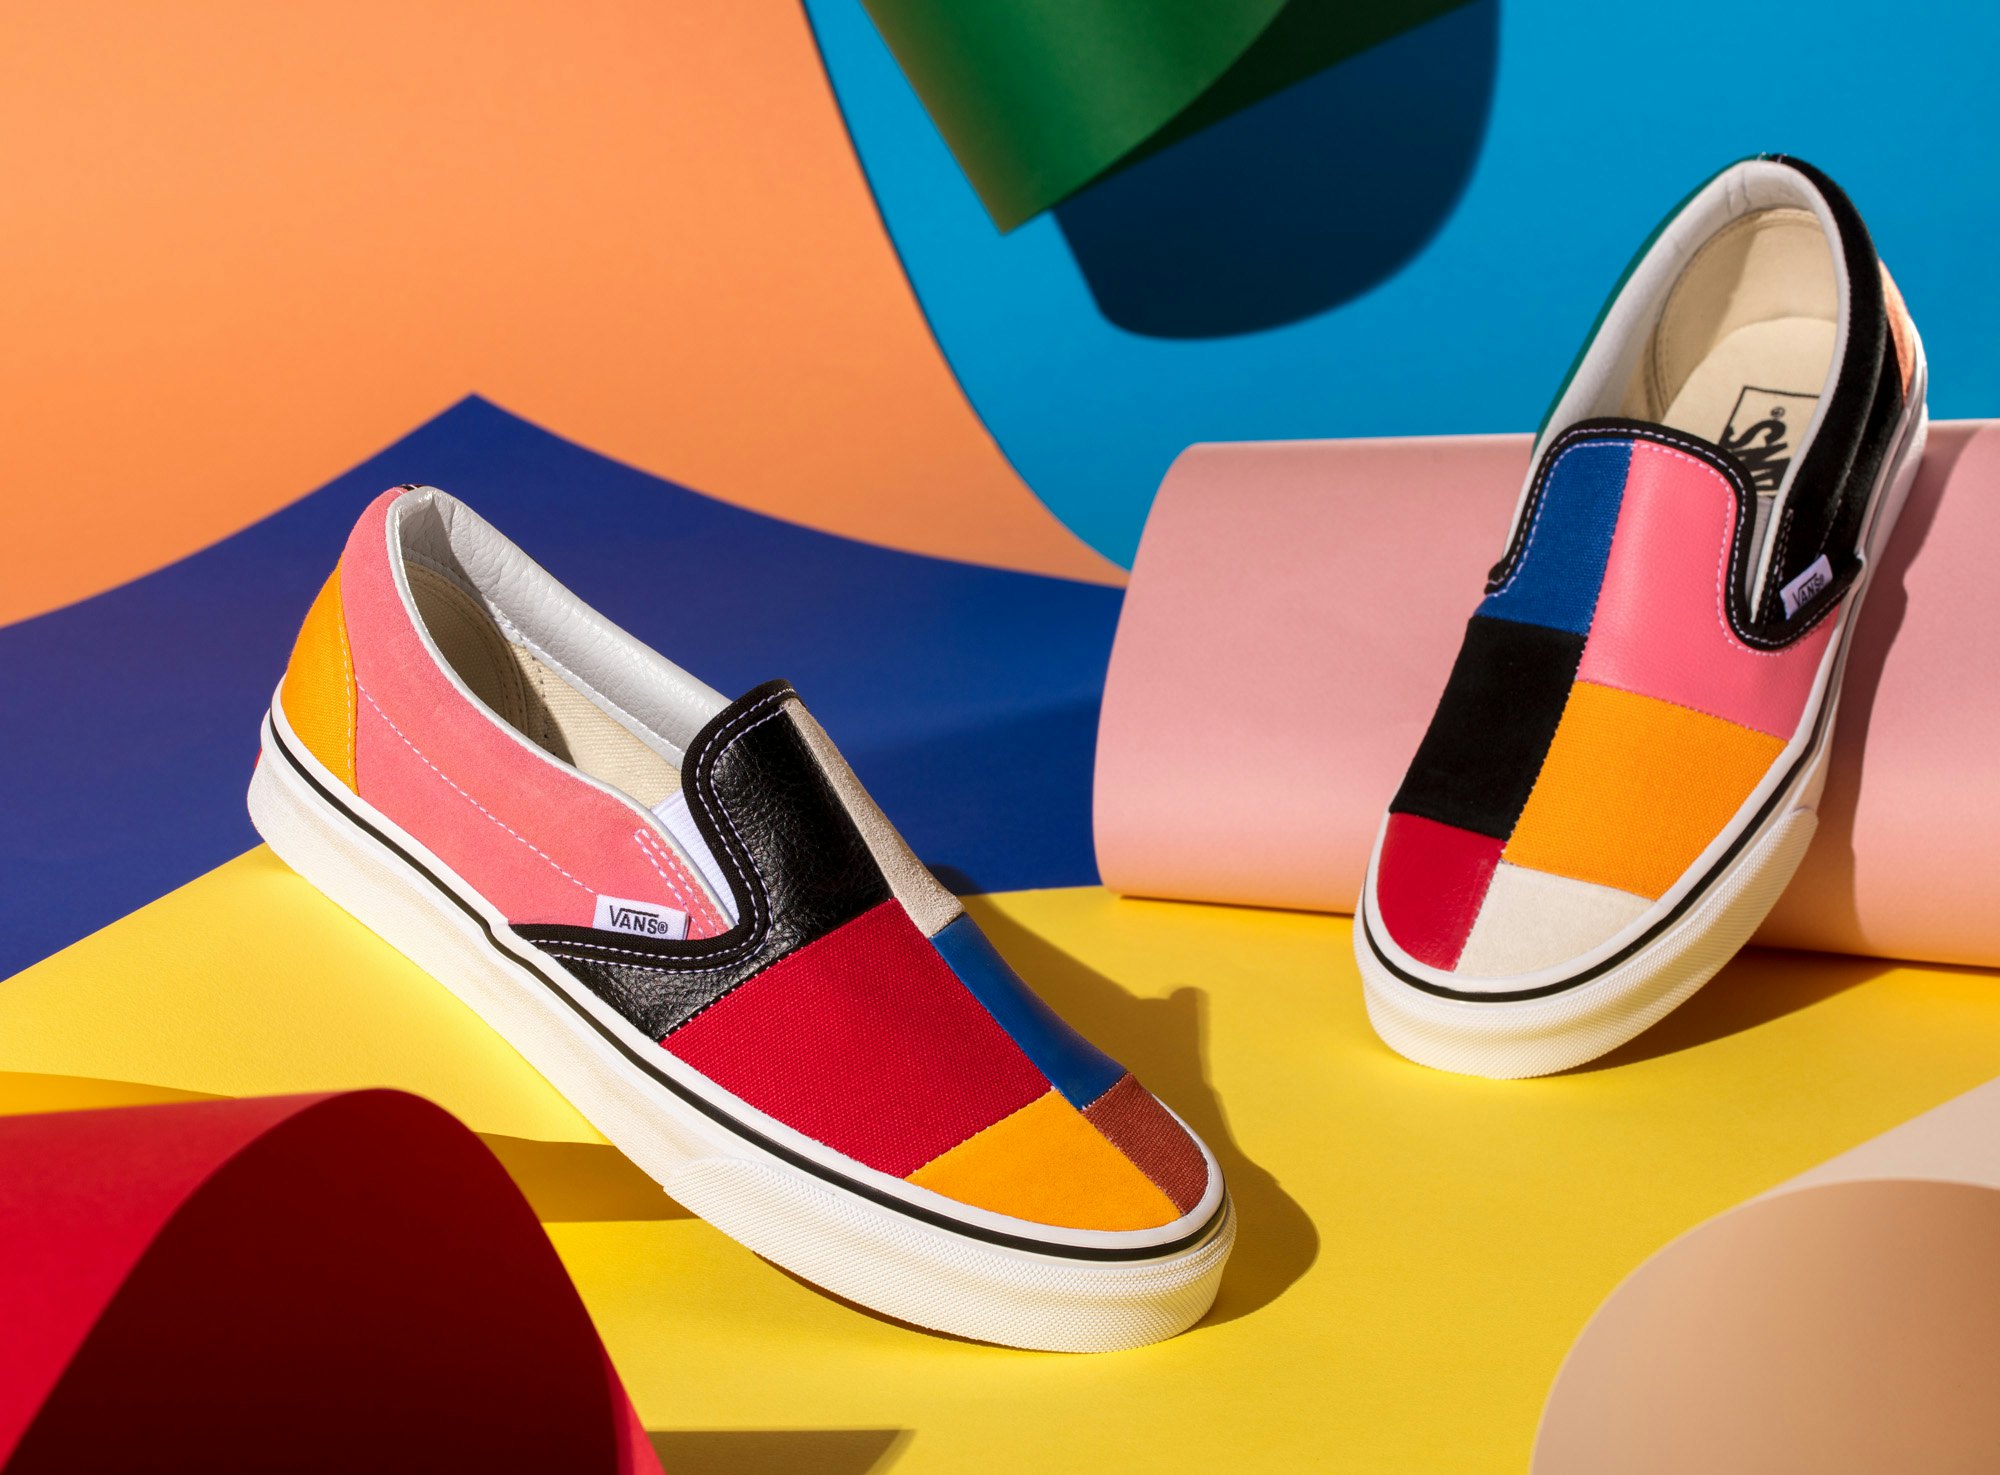 the new colorful vans